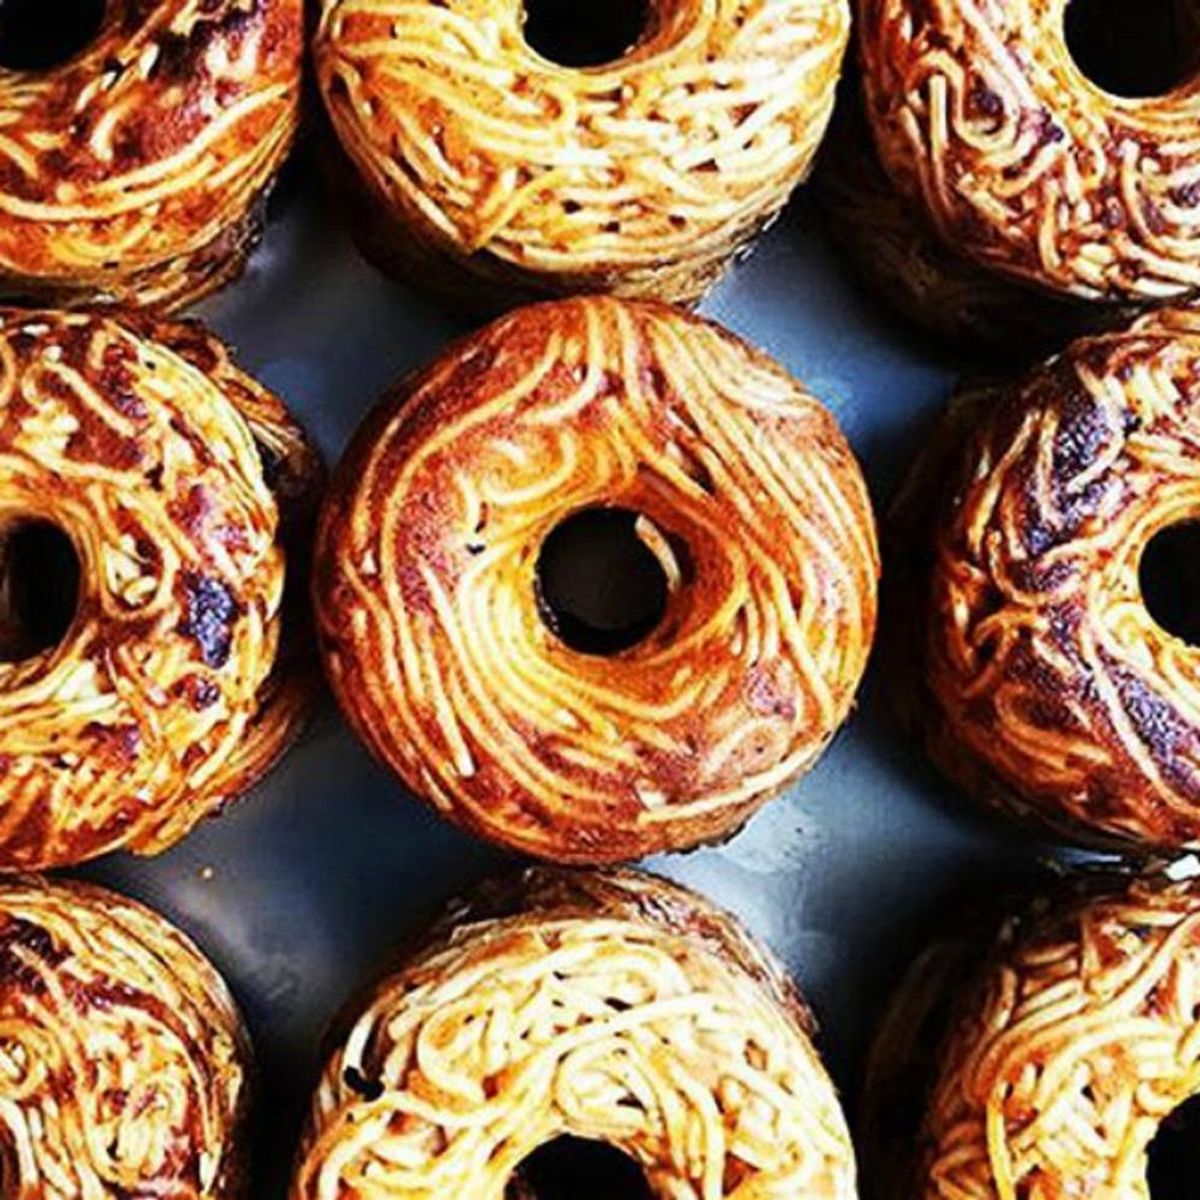 10 Instagrammers Whose Spaghetti Donuts Are Giving Us a Major Case of FOMO